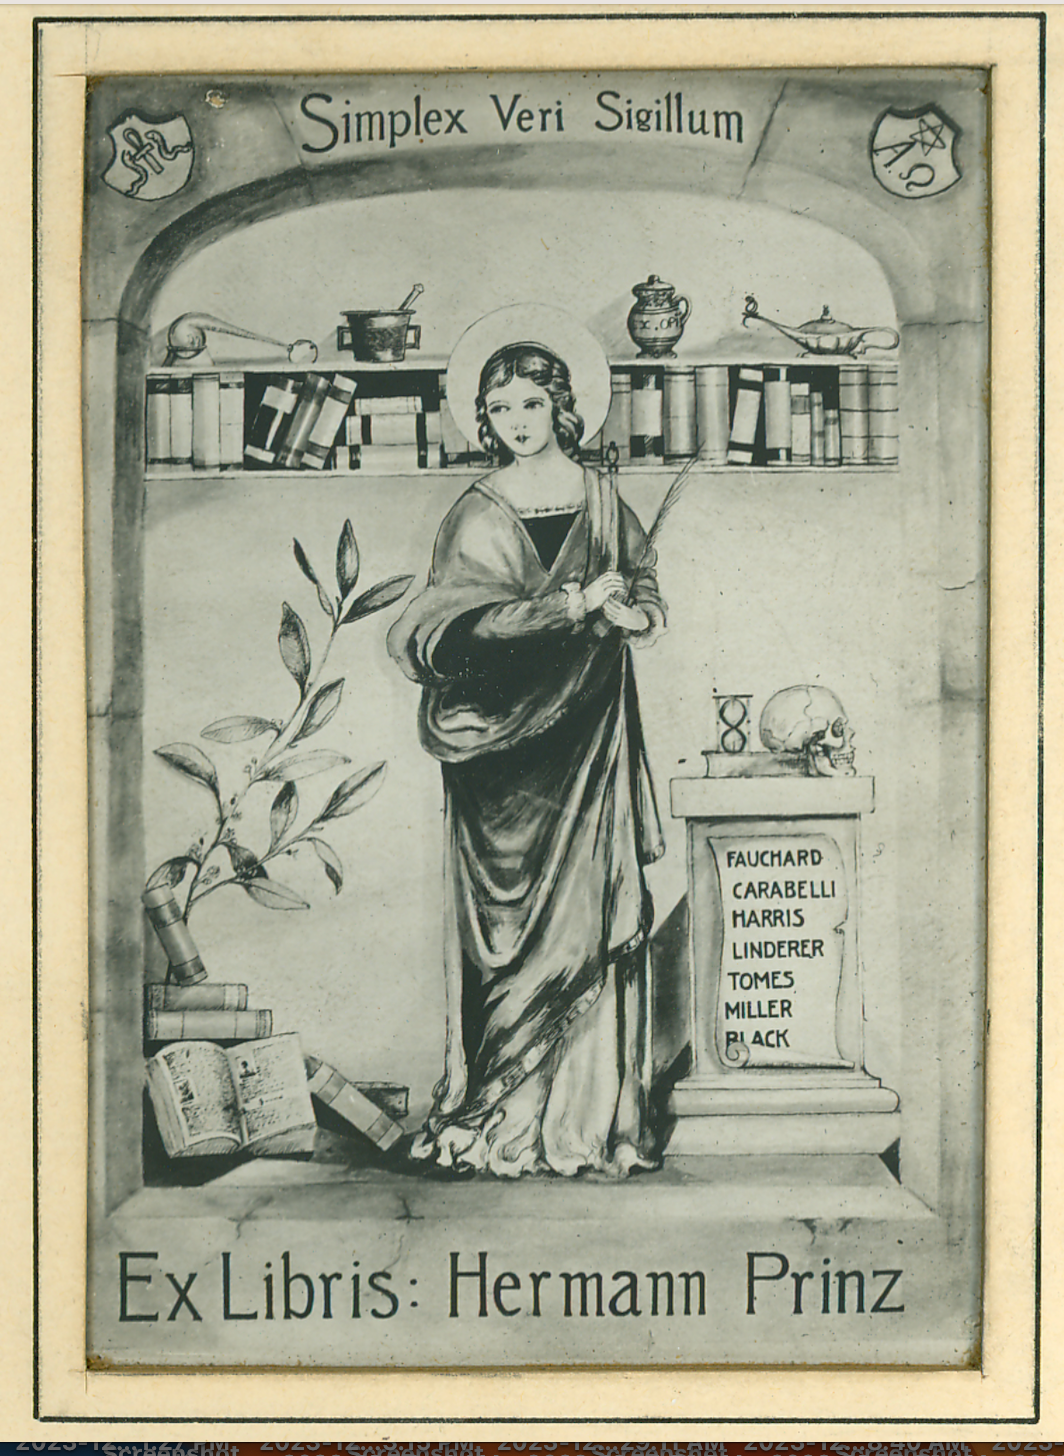 A bookplate shows a woman in front of a collection of books, holding a quill pen.